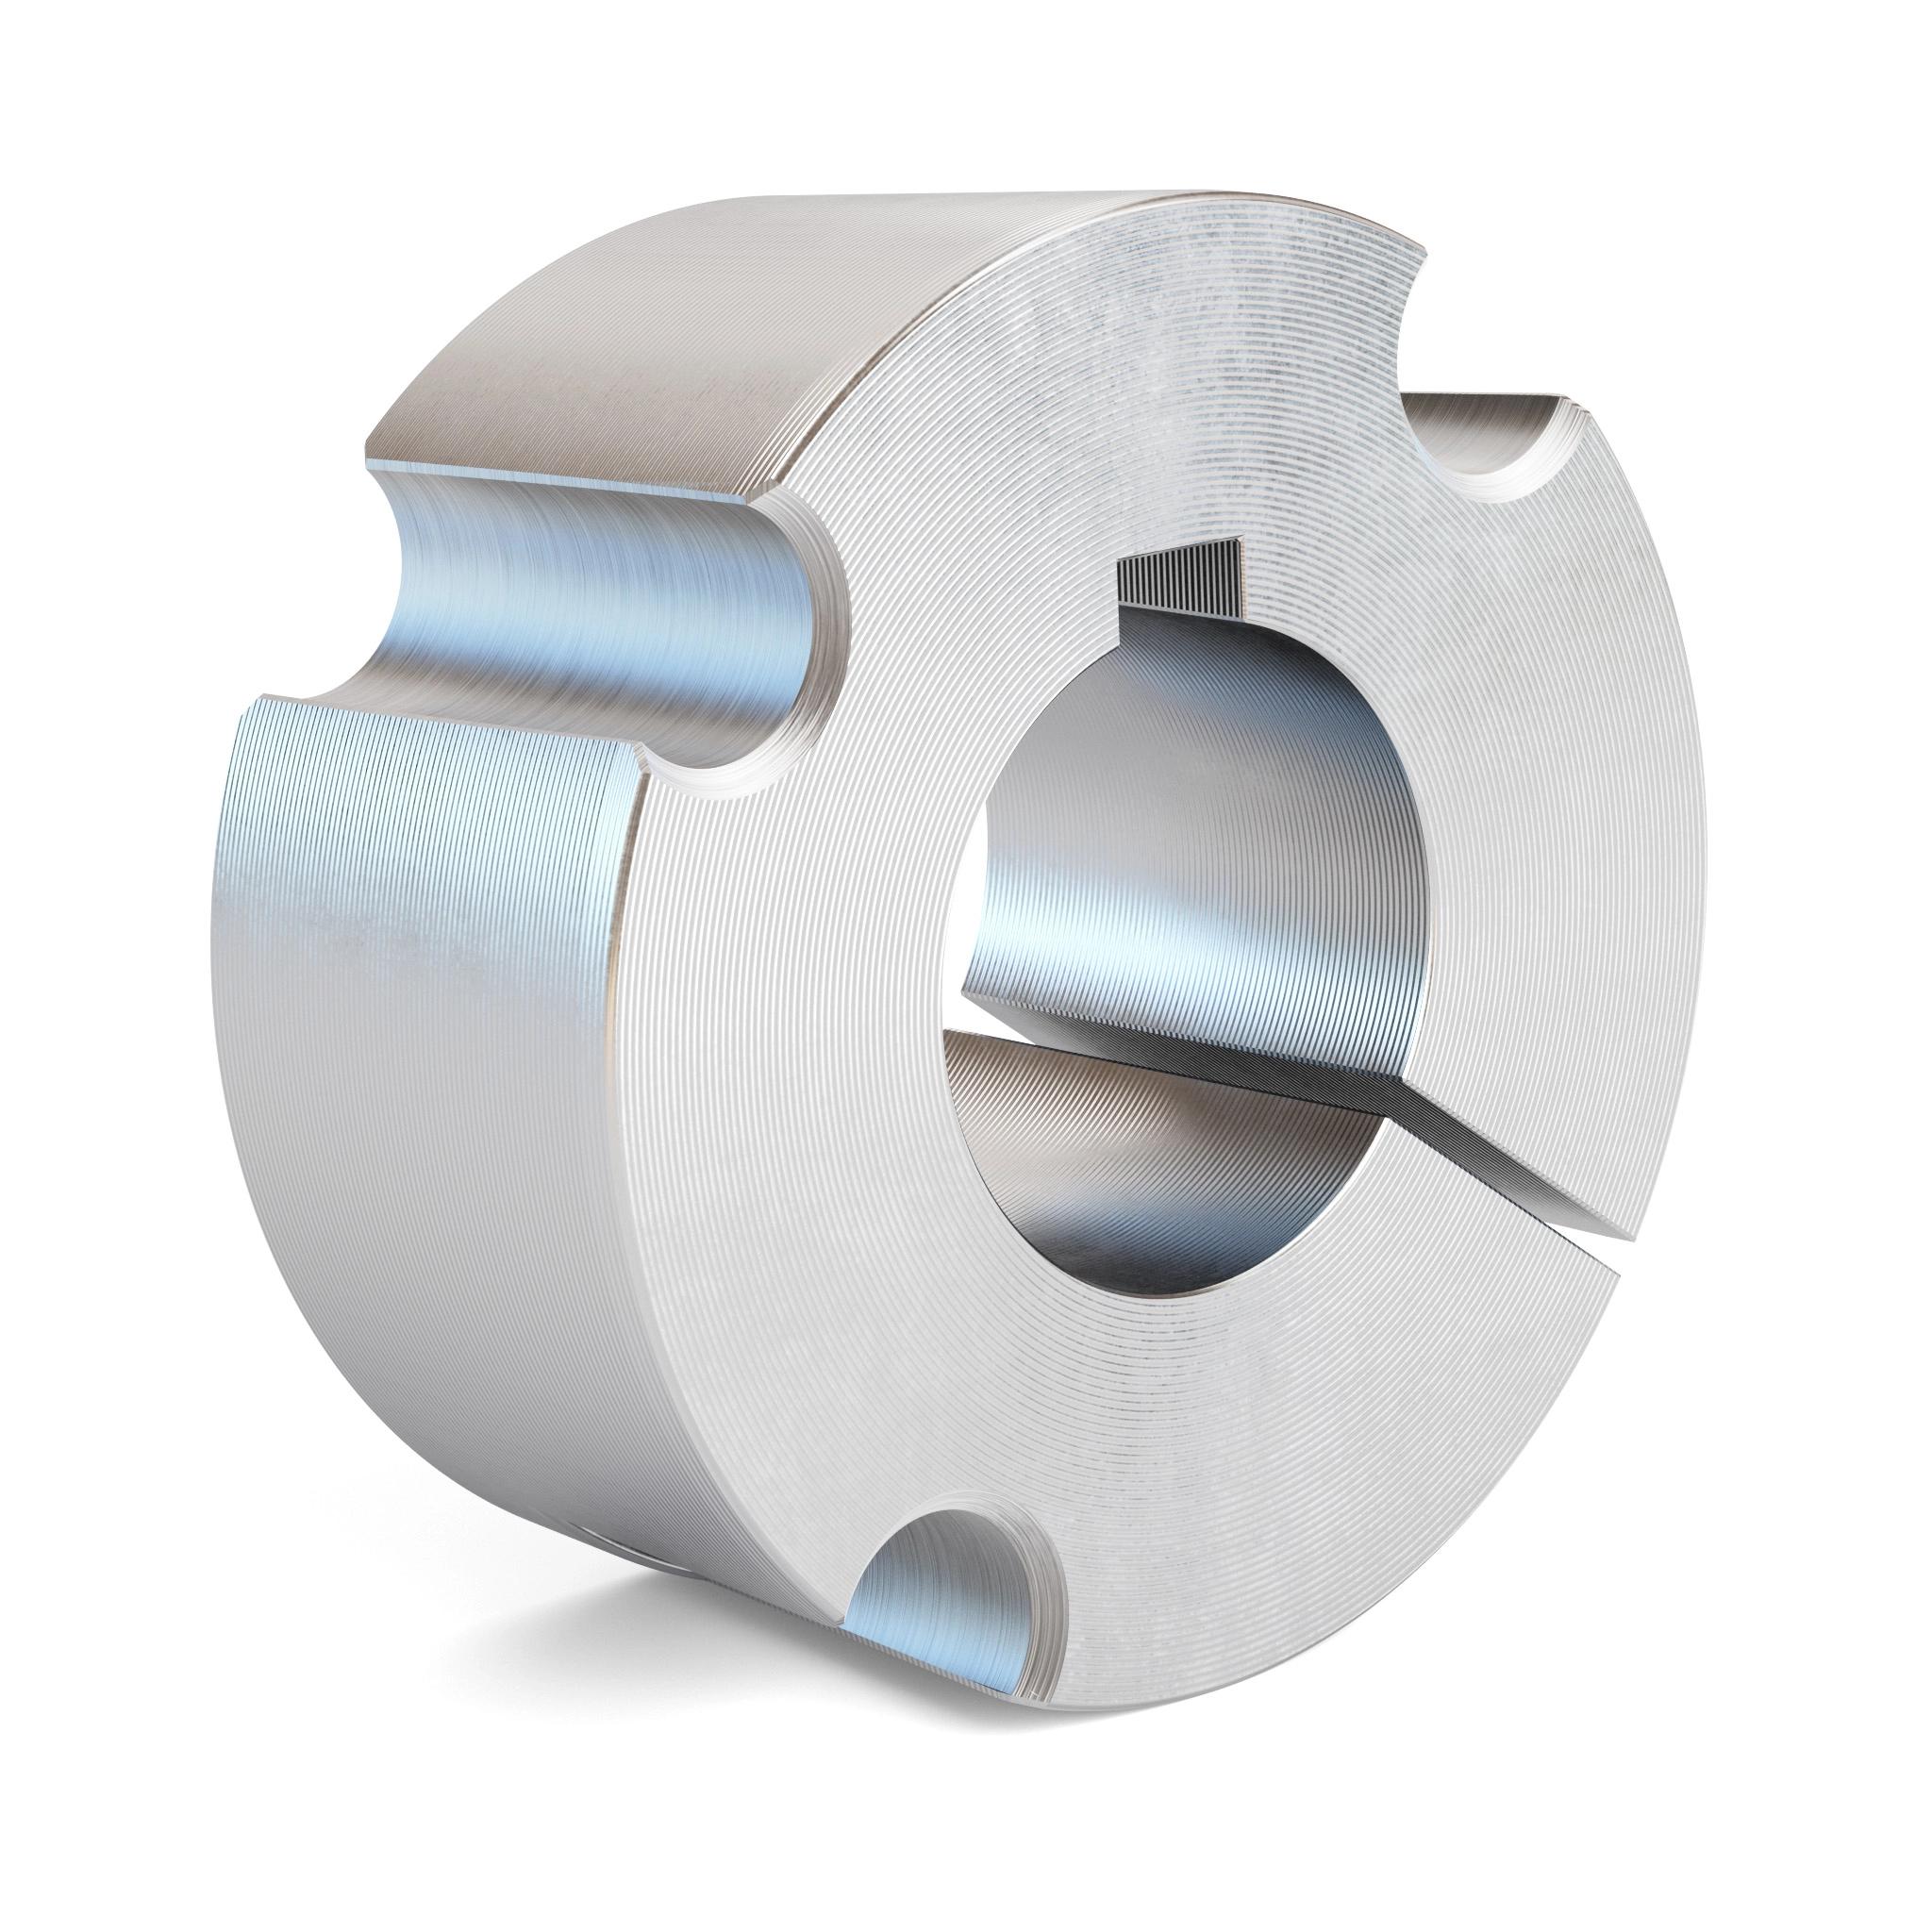 Gates 3525 3.1/4 Taper-Lock Bushings, 3525 3.1/4 BUSH 19 X 10Use with all Taper-Lock® style sheaves, sprockets and pulleys.